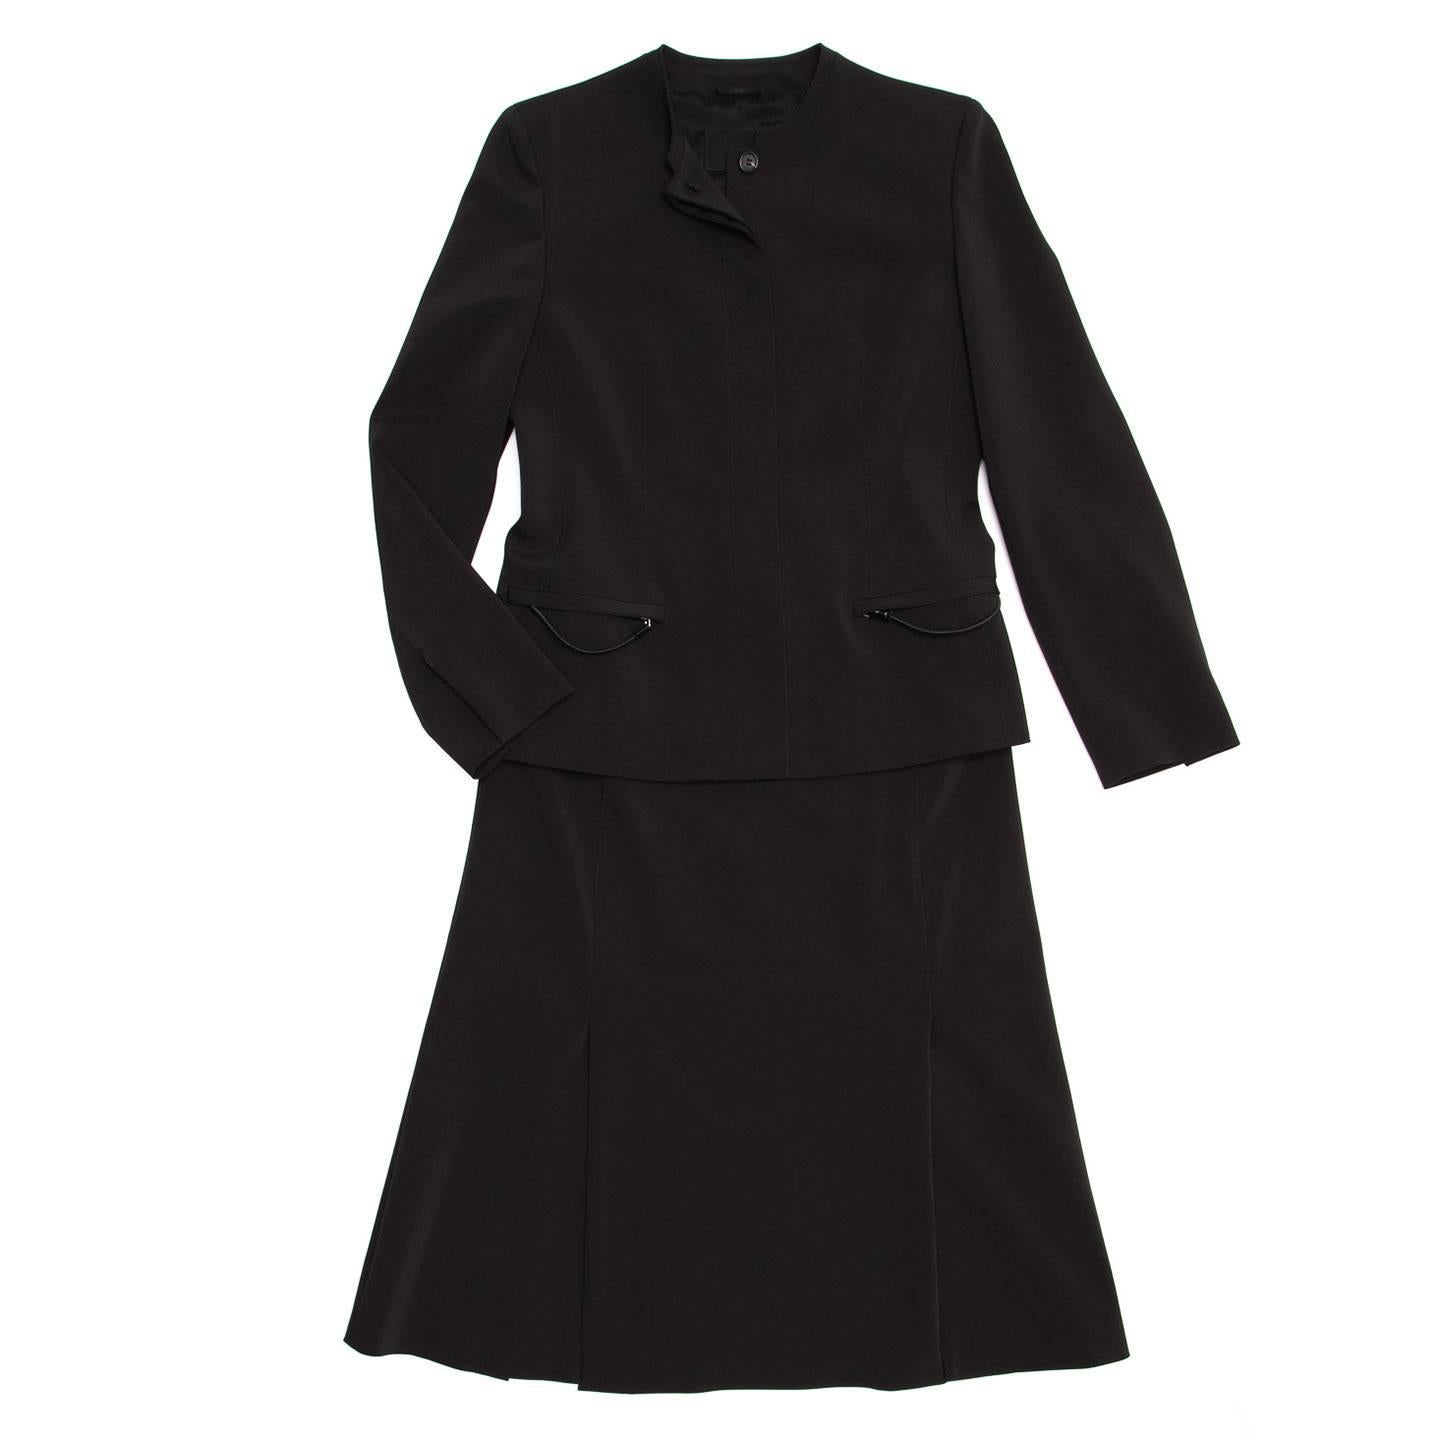 Black acetate blend skirt suit with zigzag stitching details. The jacket is hip length, has a classic round neck, a front opening with a flap covering the buttons and pockets with zippers and puller detail. The skirt is knee length, fitted until